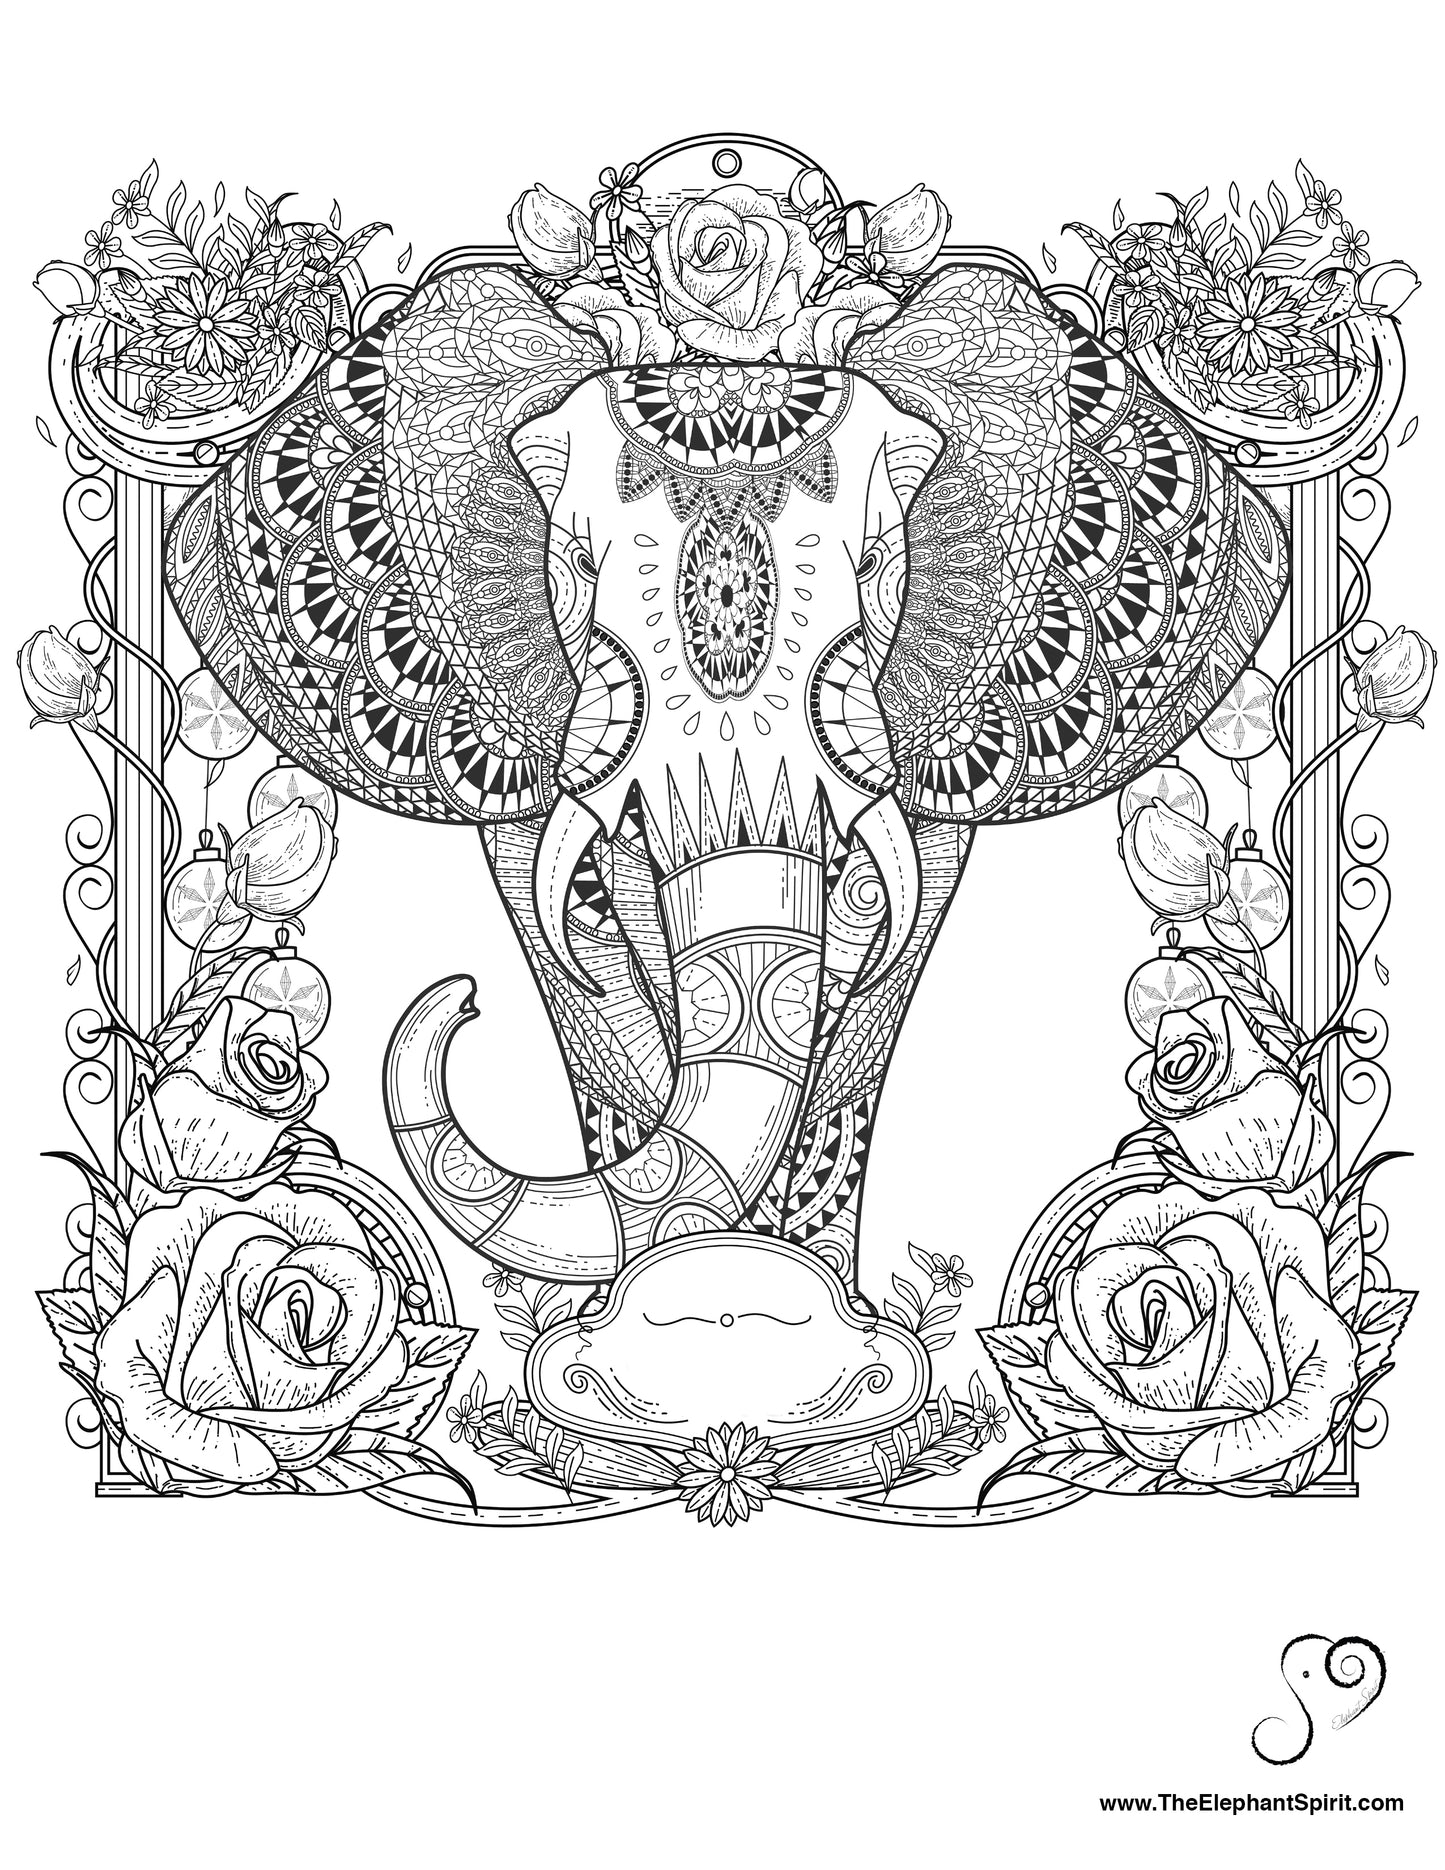 FREE Coloring Page 12-29